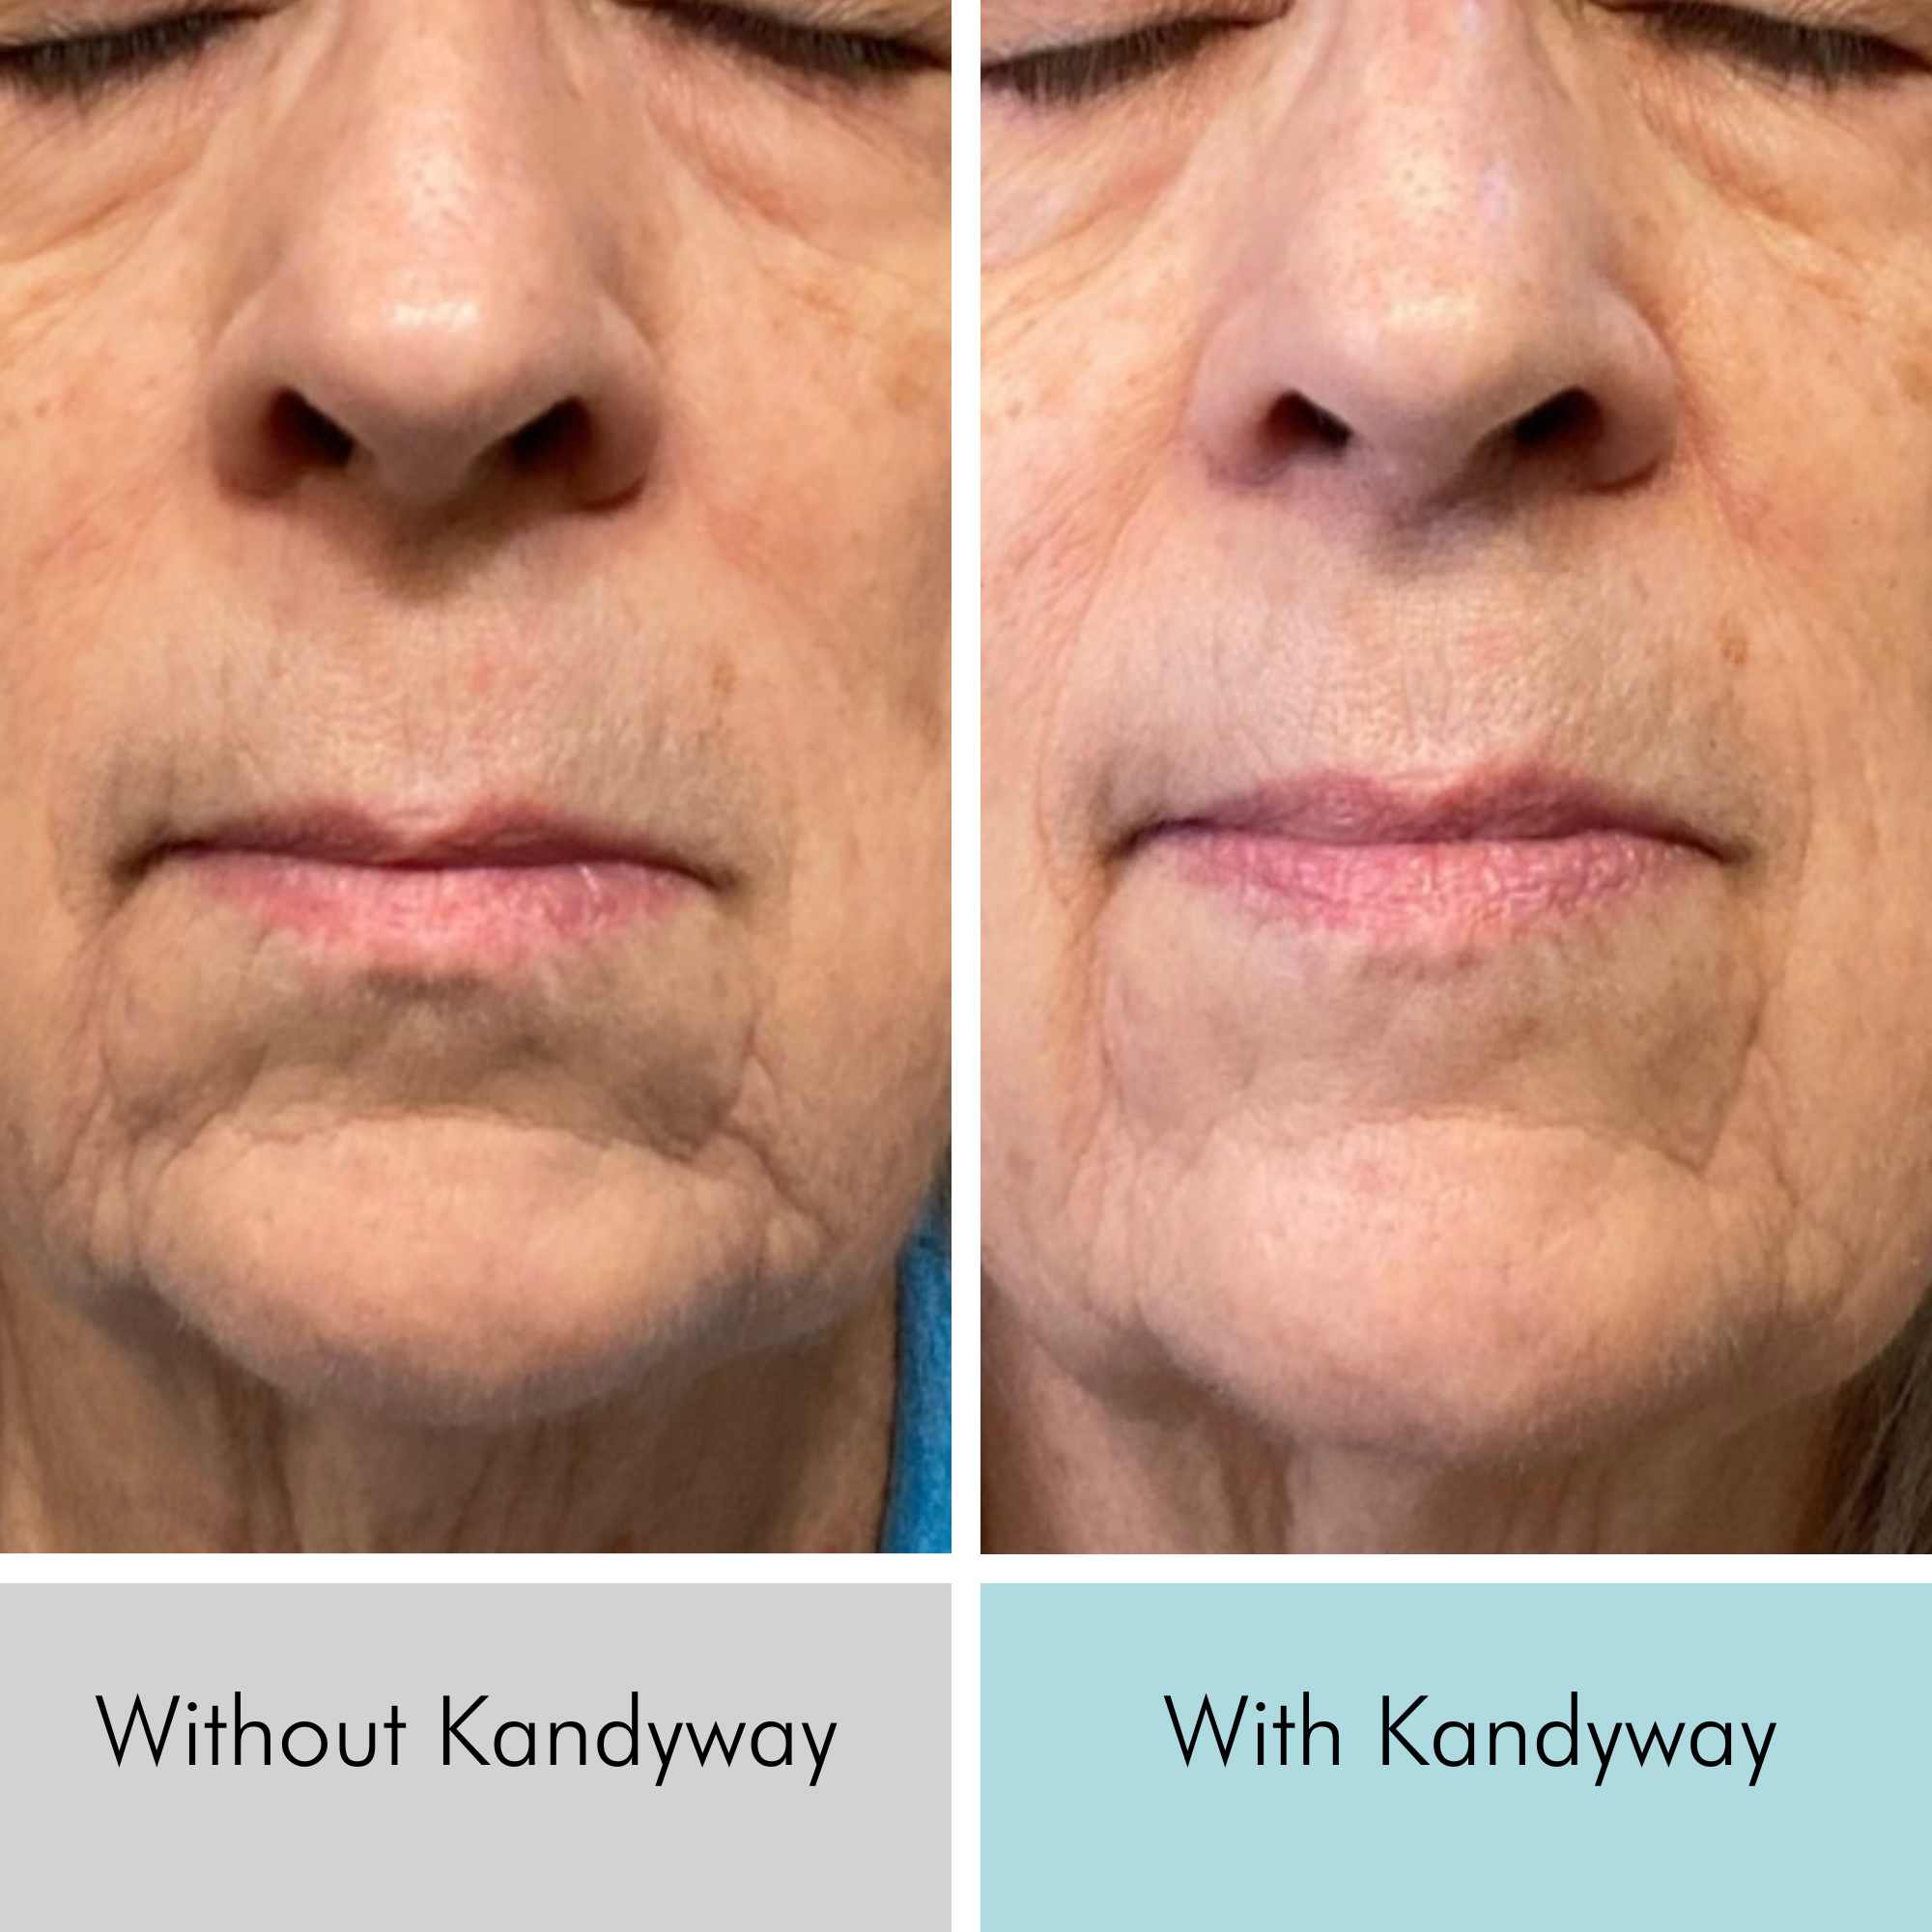 60+ year old women showing significant wrinkle reduction